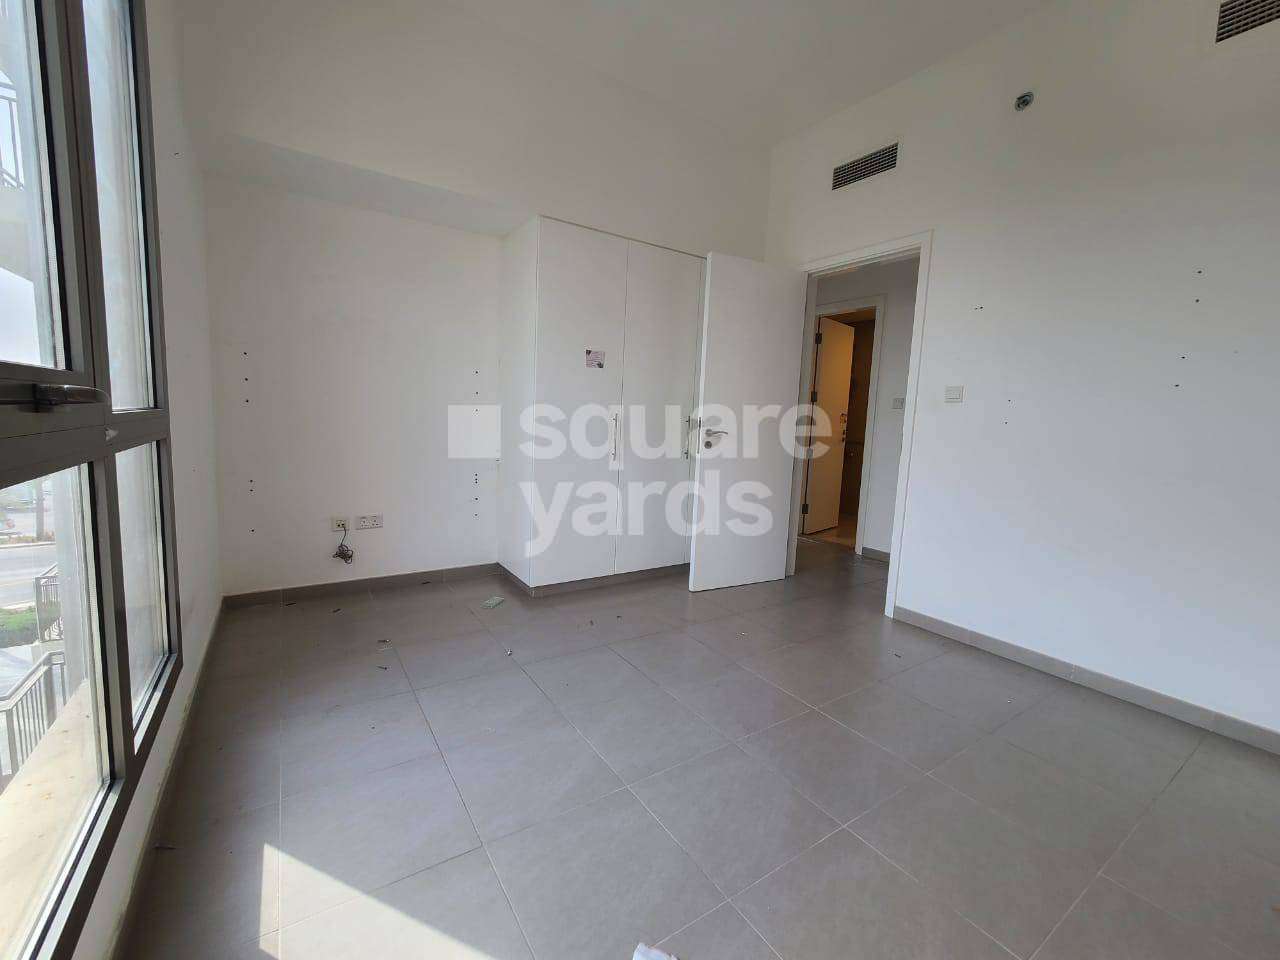 2 BR  Apartment For Rent in Zahra Apartments 2A